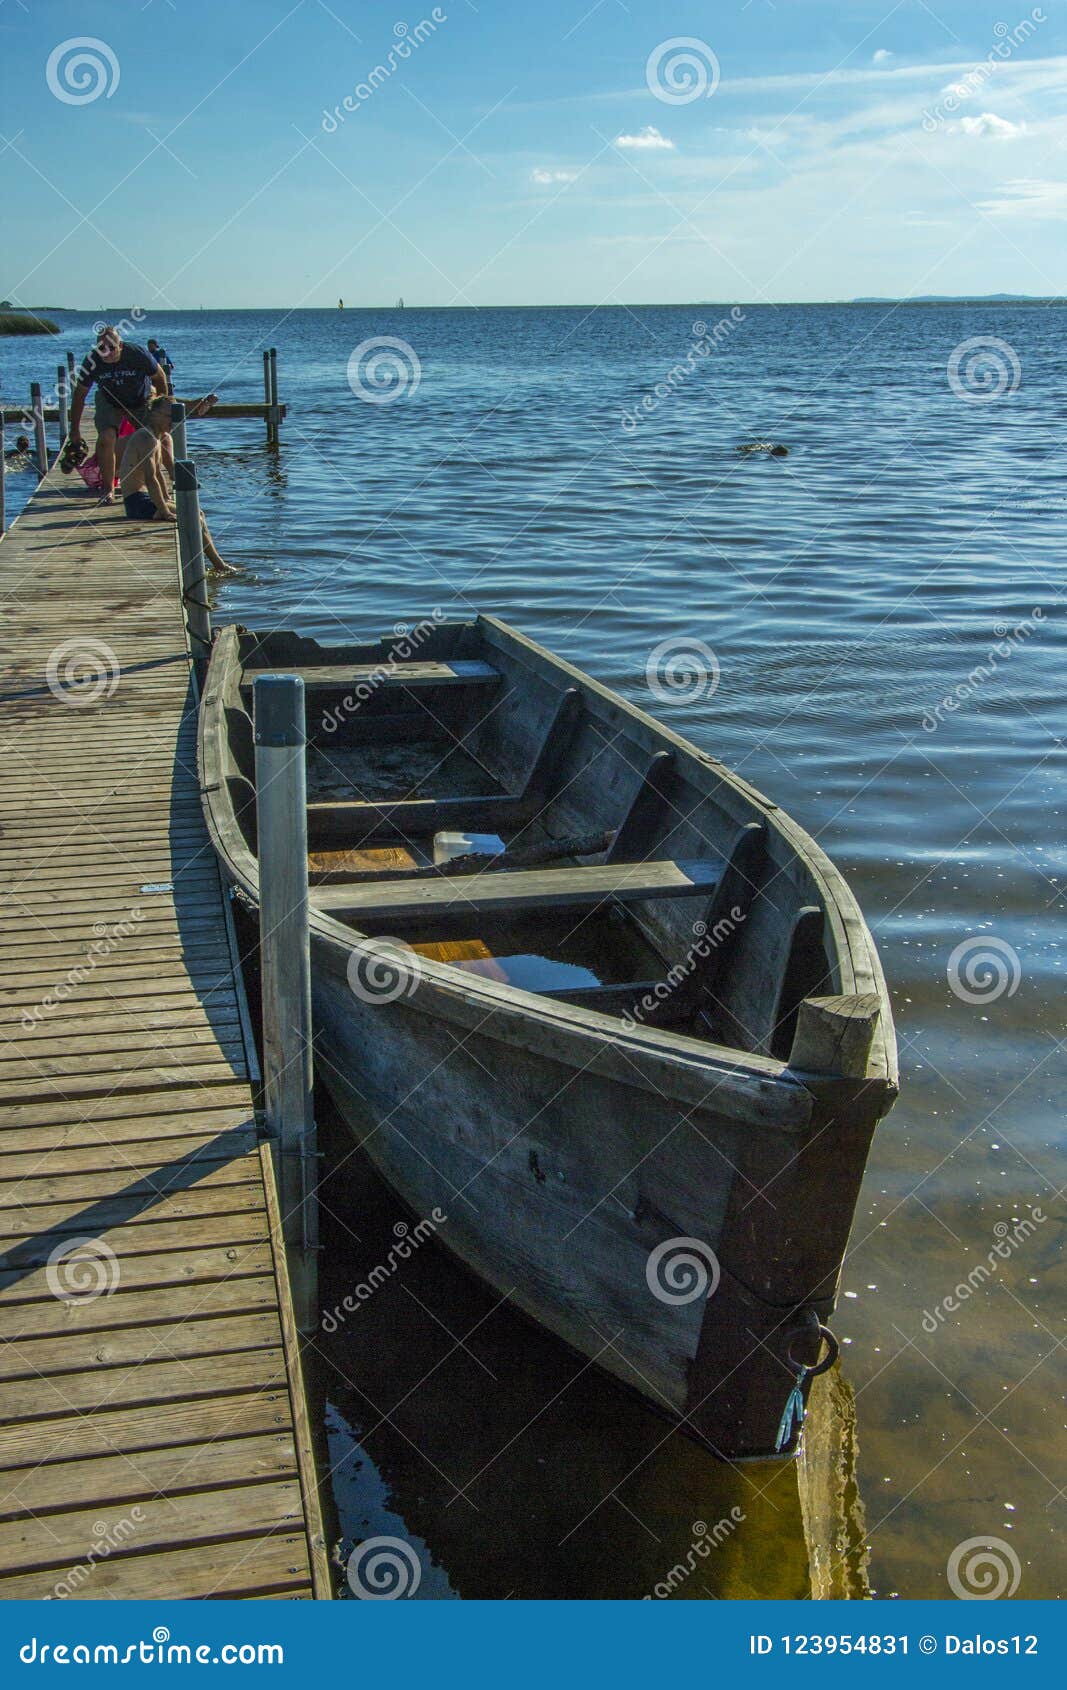 https://thumbs.dreamstime.com/z/summer-landscape-wooden-fishing-boats-lake-old-water-lithuania-europe-pier-near-shore-moored-small-bridge-two-123954831.jpg